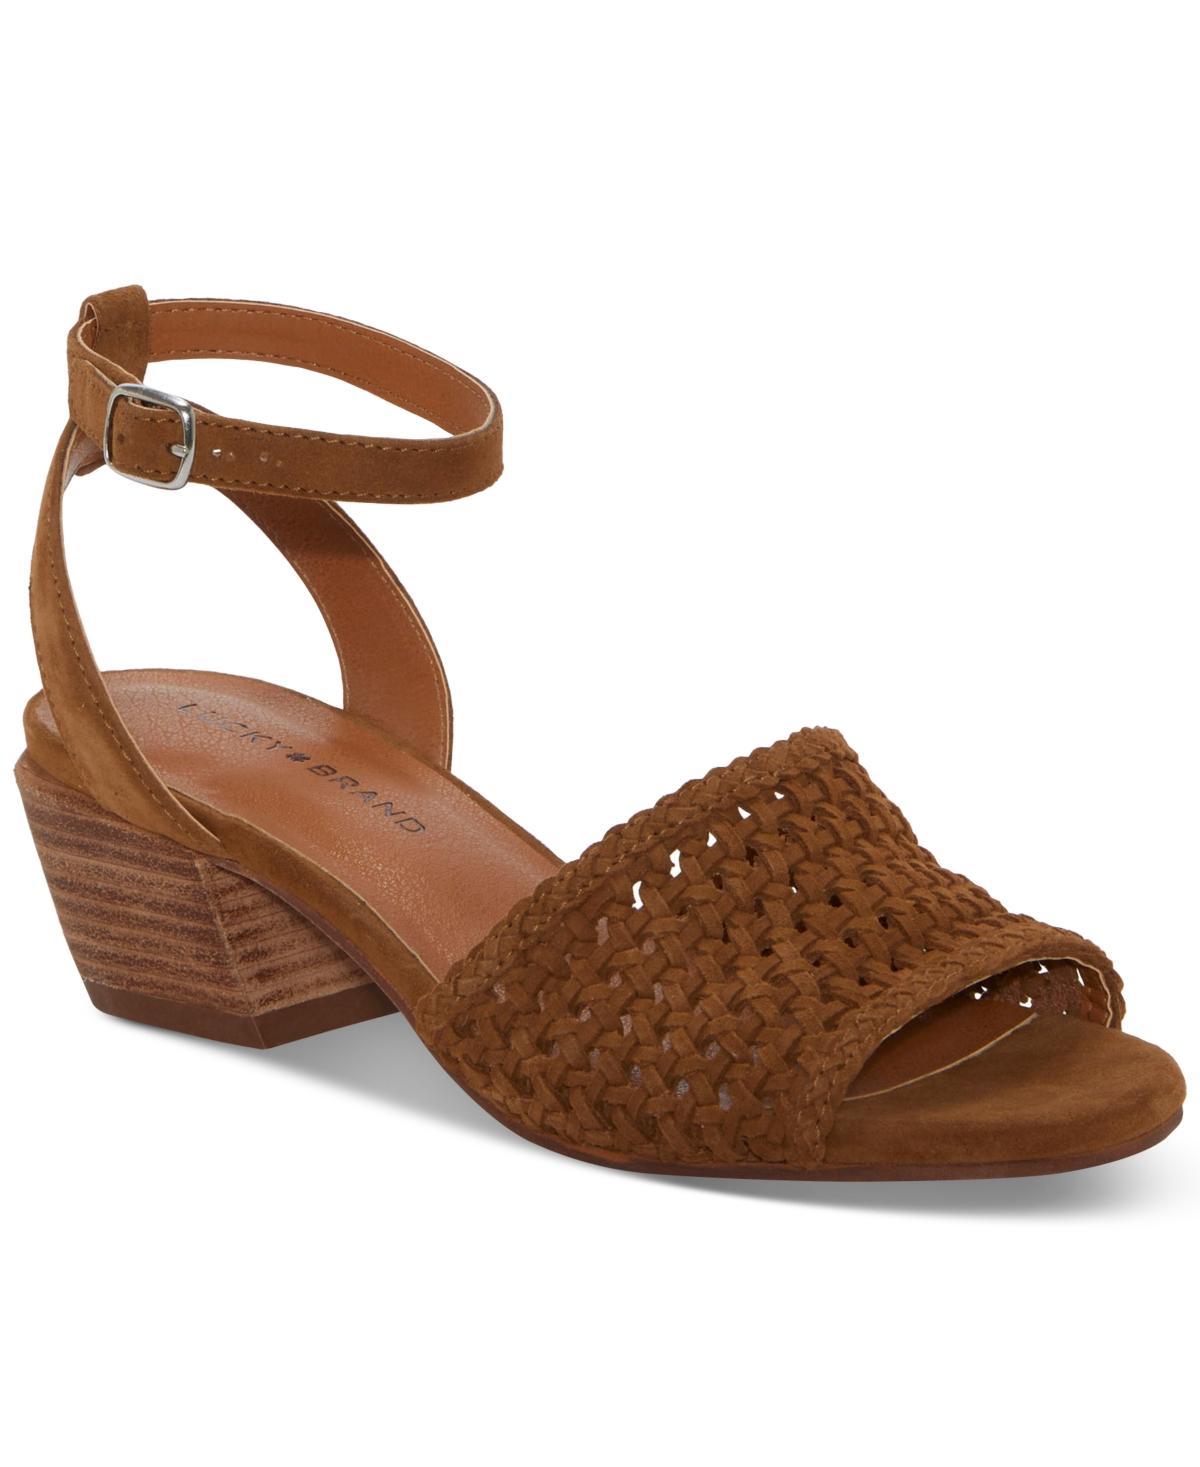 Lucky Brand Modessa Ankle Strap Sandal Product Image